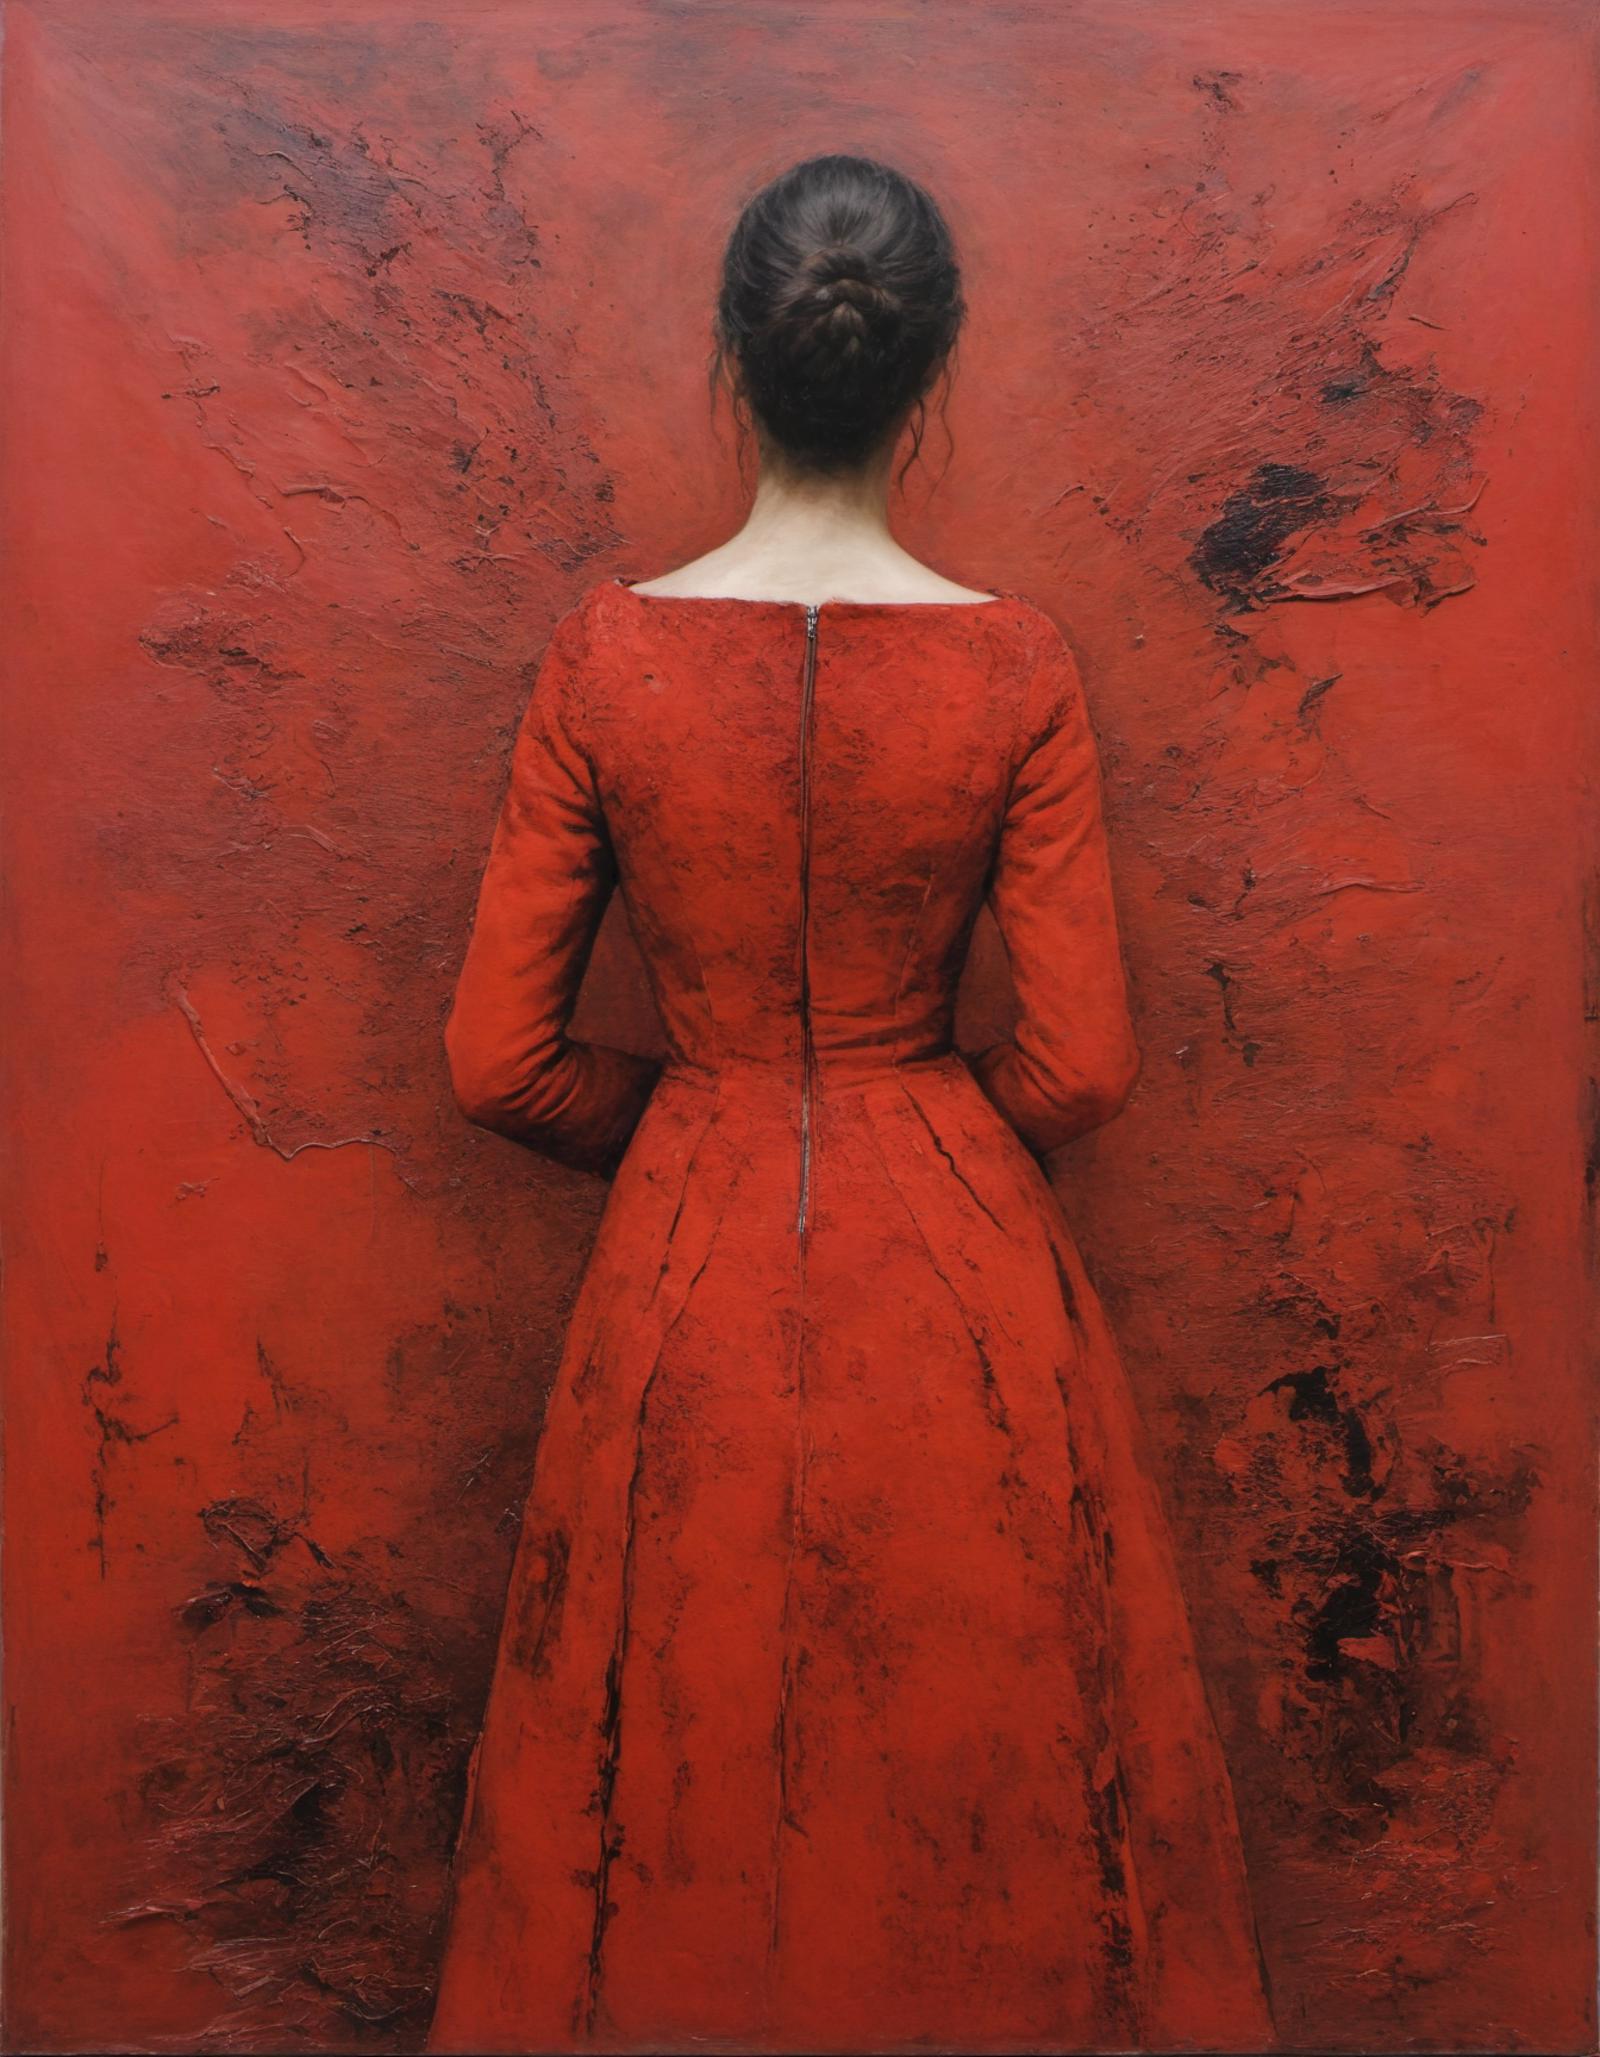 A woman wearing a red dress and bow in her hair standing in front of a red wall.